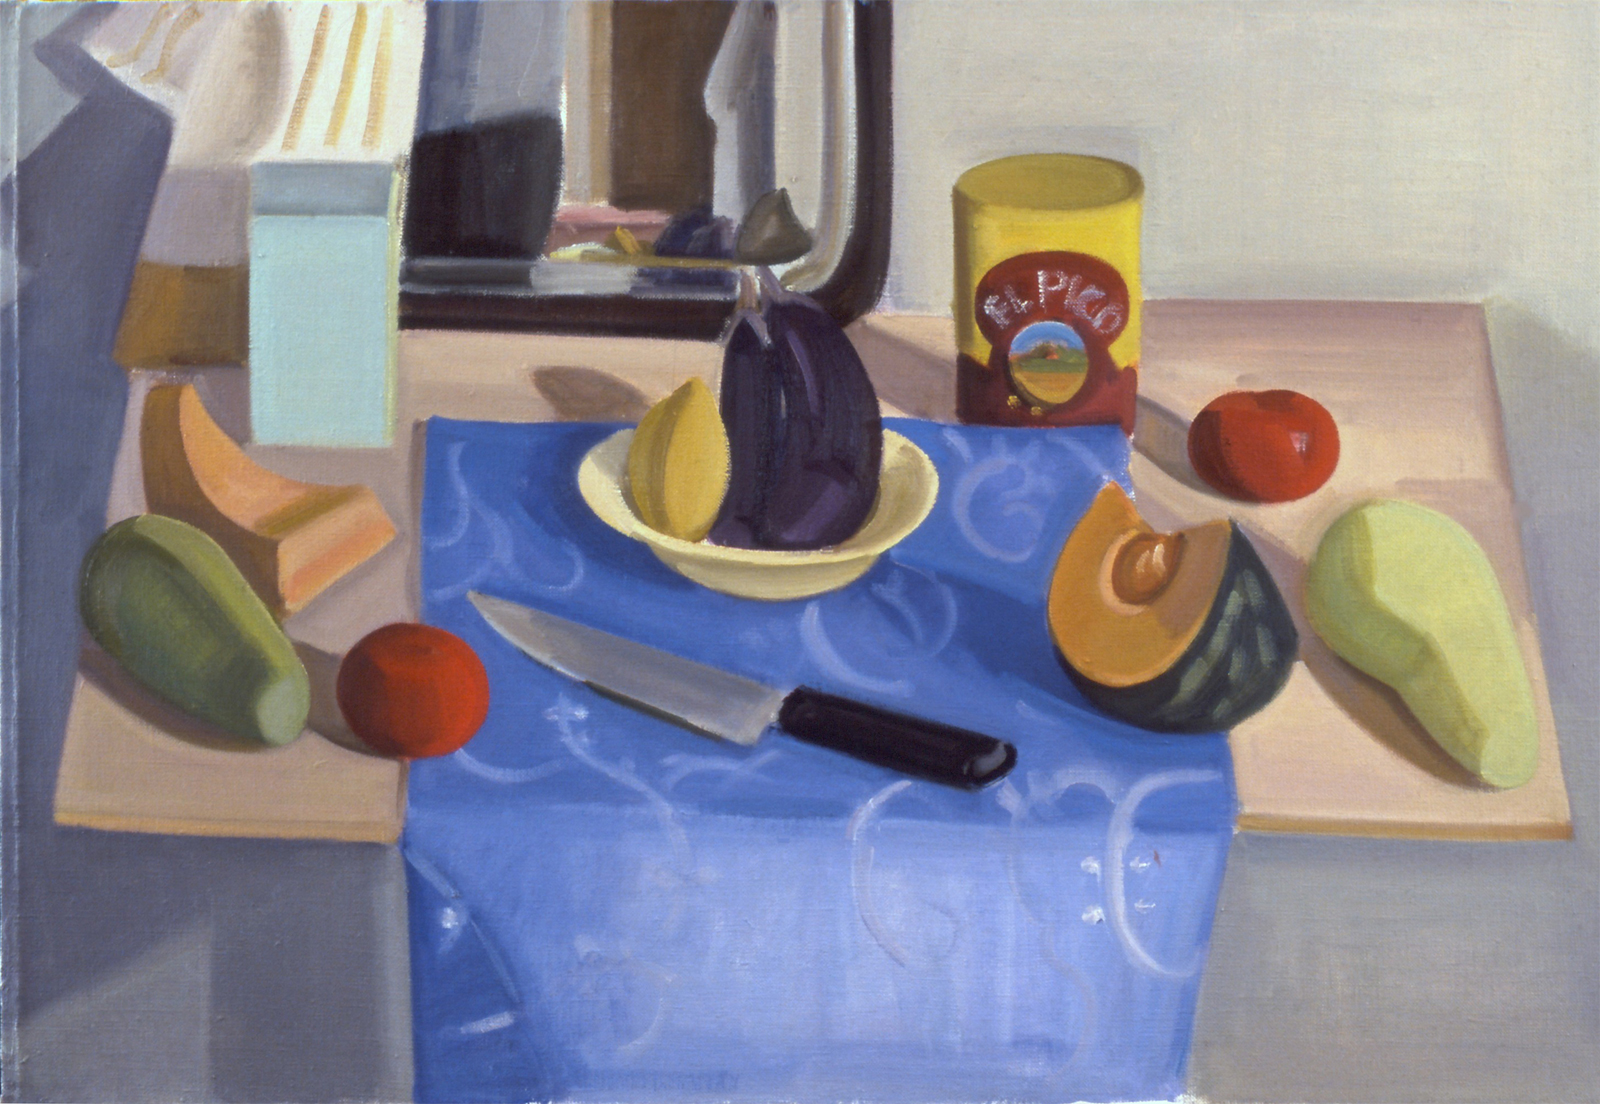   El Pico Can And Mirror , 2006, oil on canvas (unframed), 25” x 36”, $2,750 